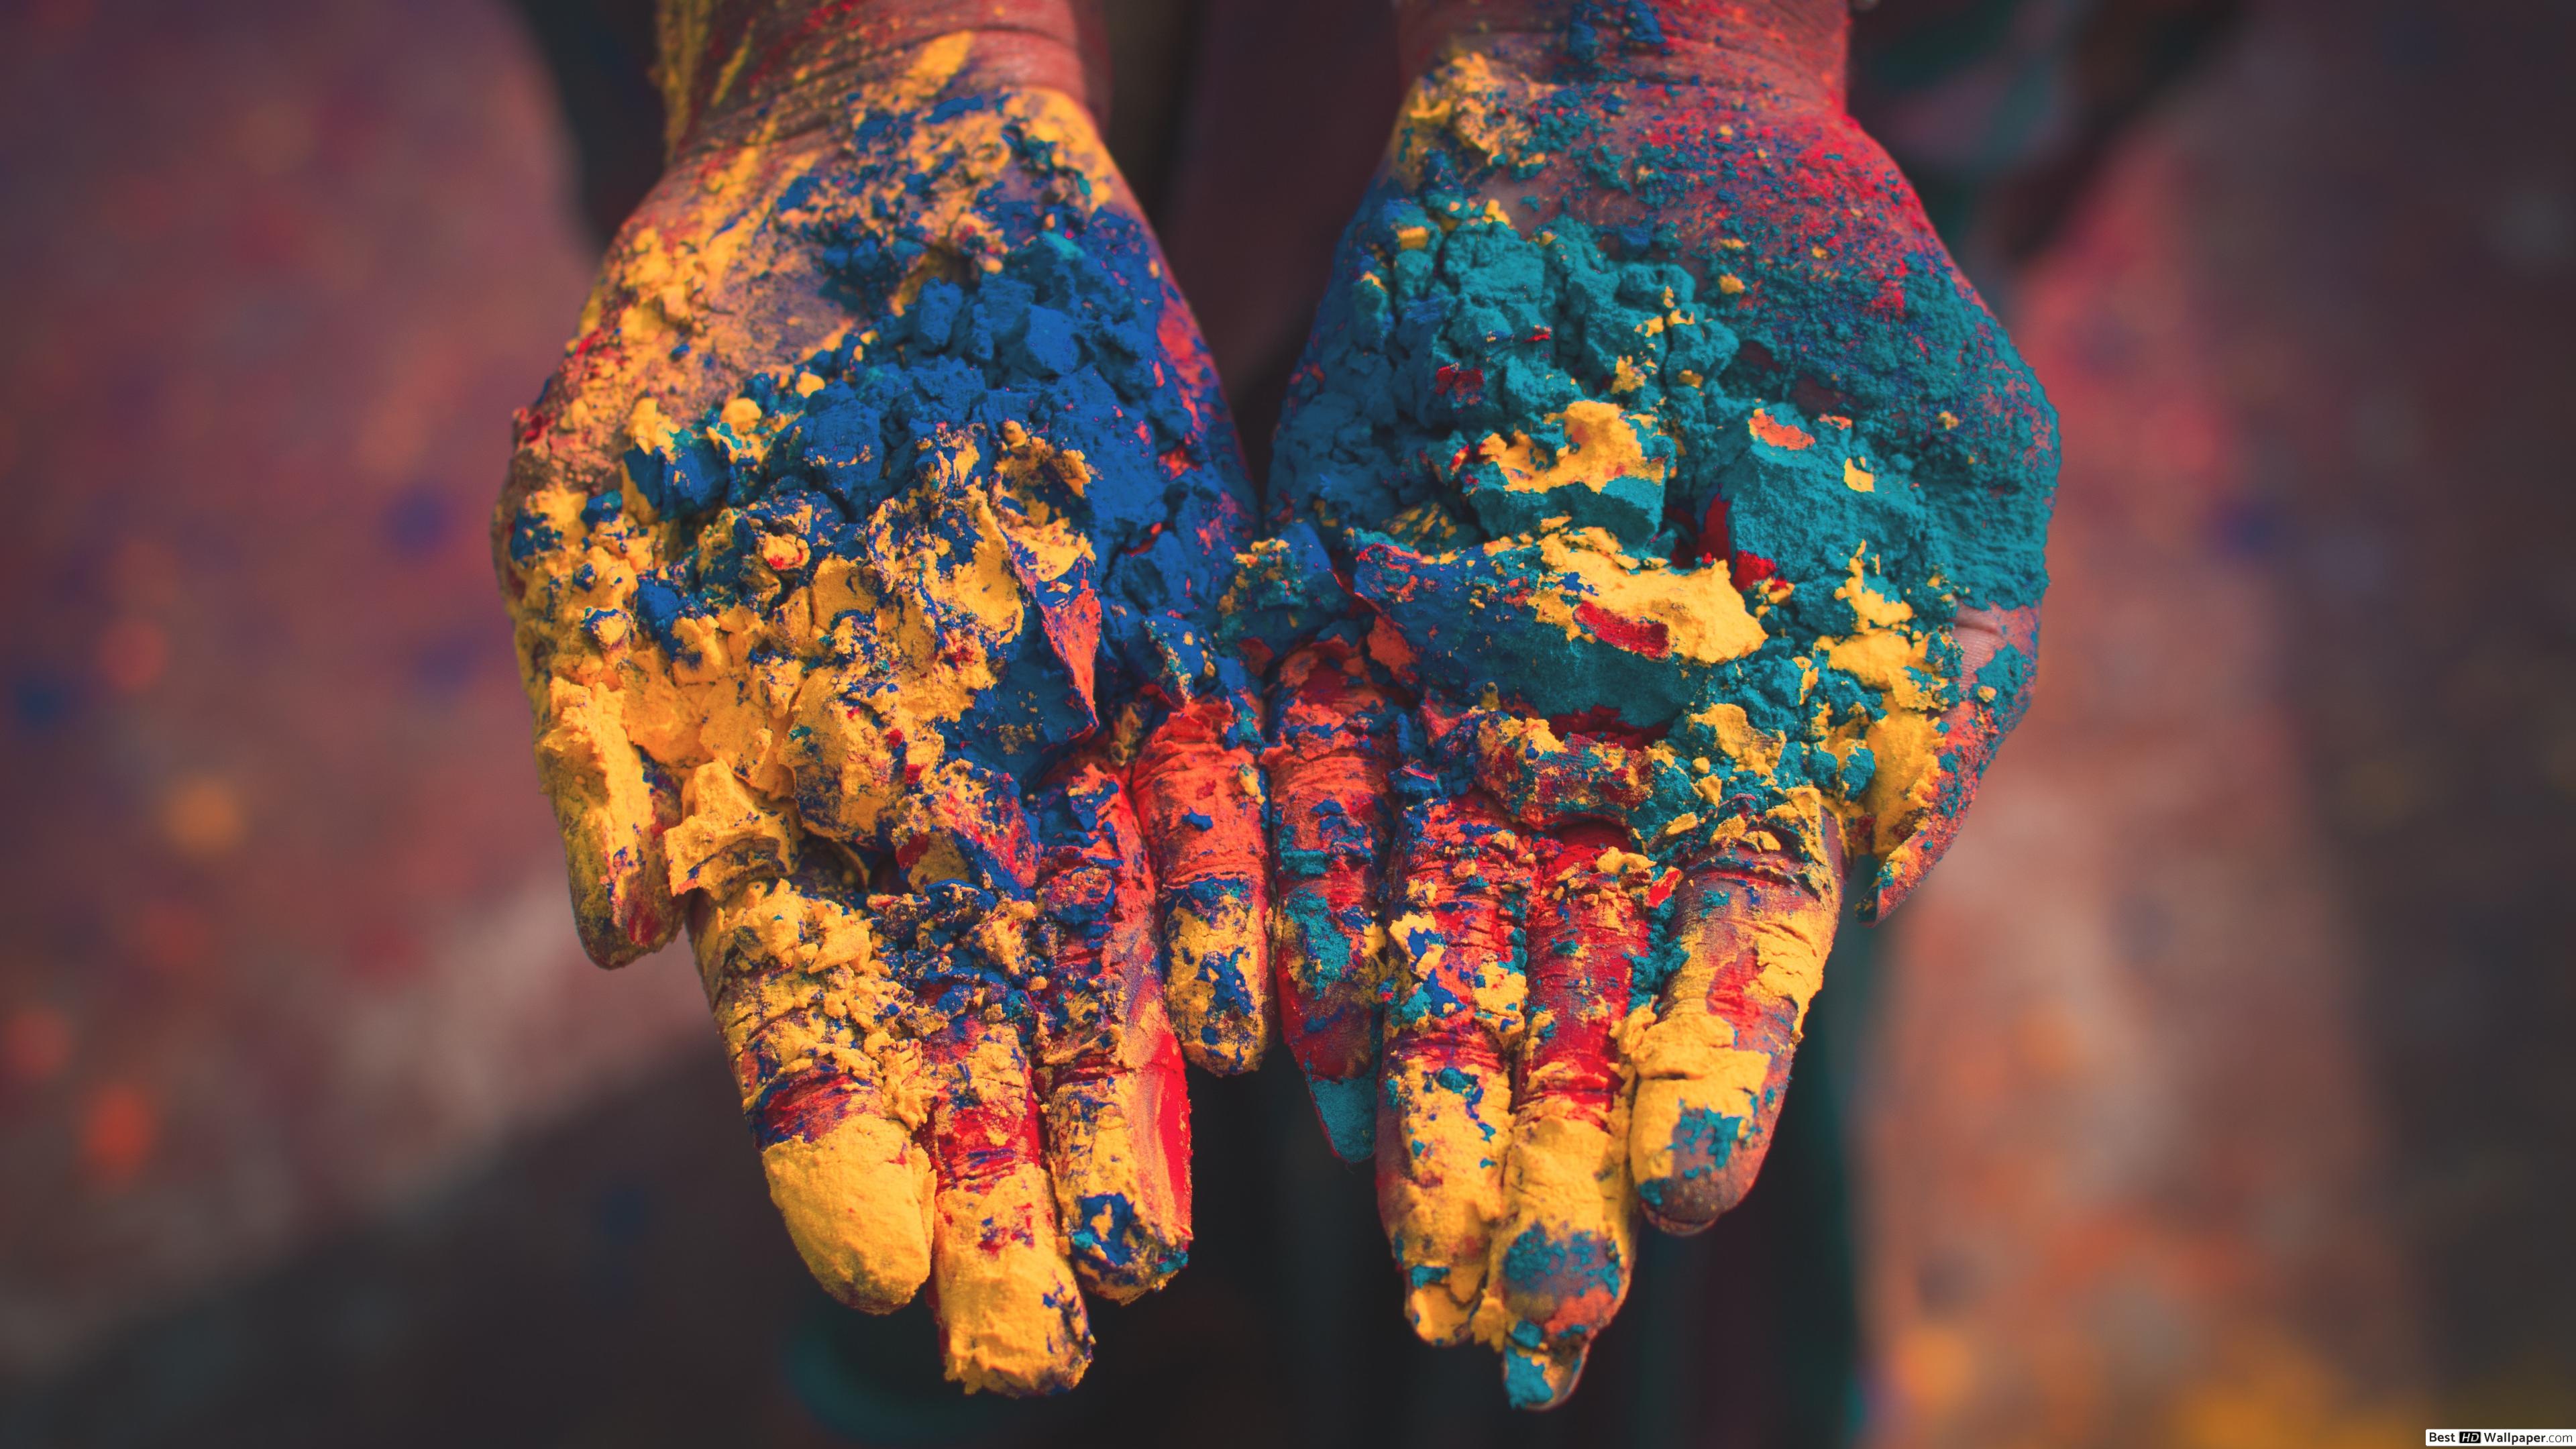 Hands full of colorful powder on Holi Festival HD wallpaper download